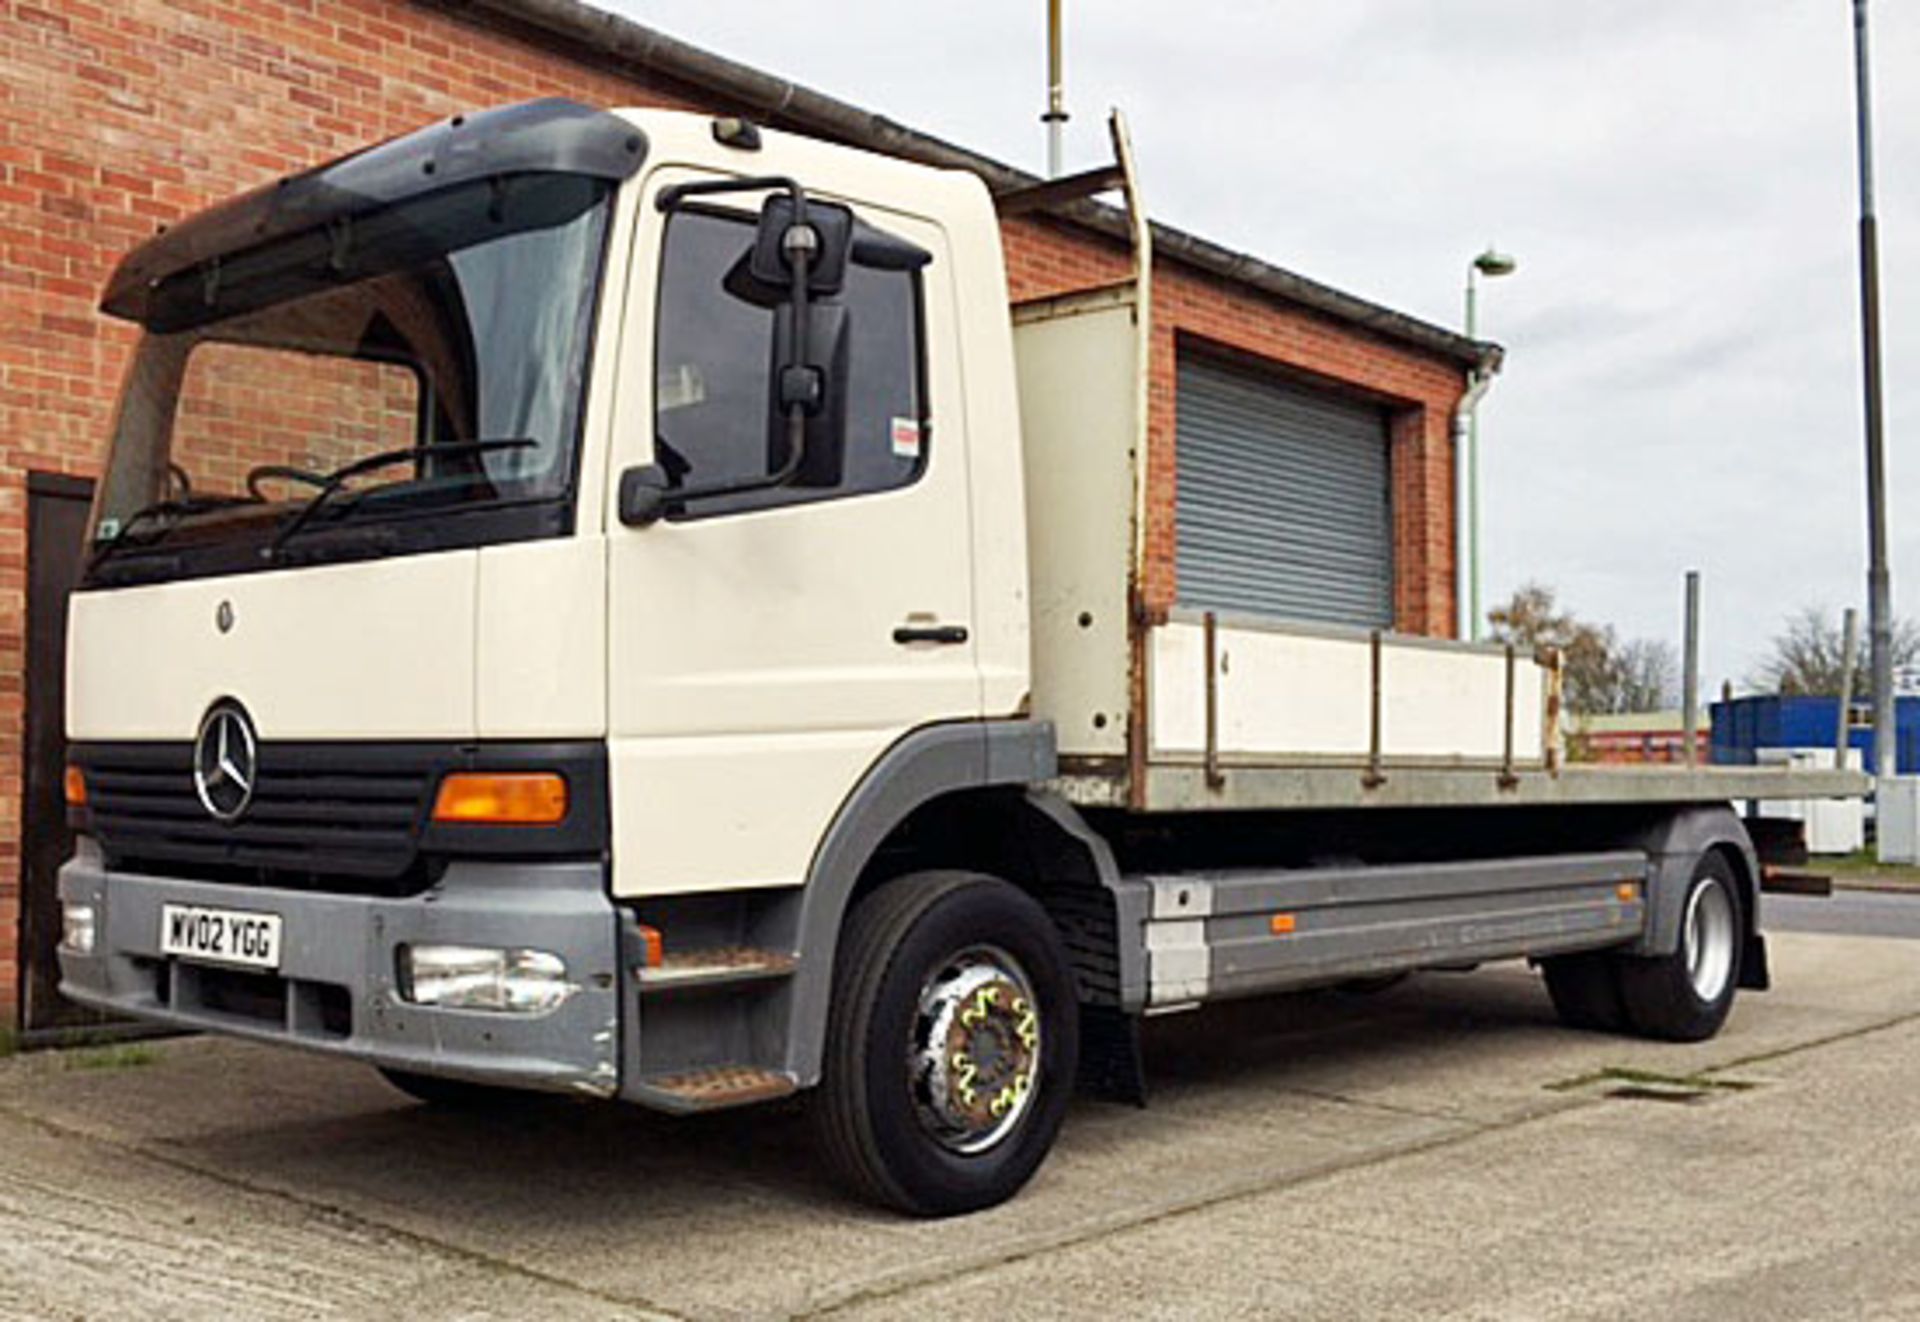 2002 (02) Mercedes 1223 Fitted with 20' Scaffold body, hardwood floor and 3 seats in cab